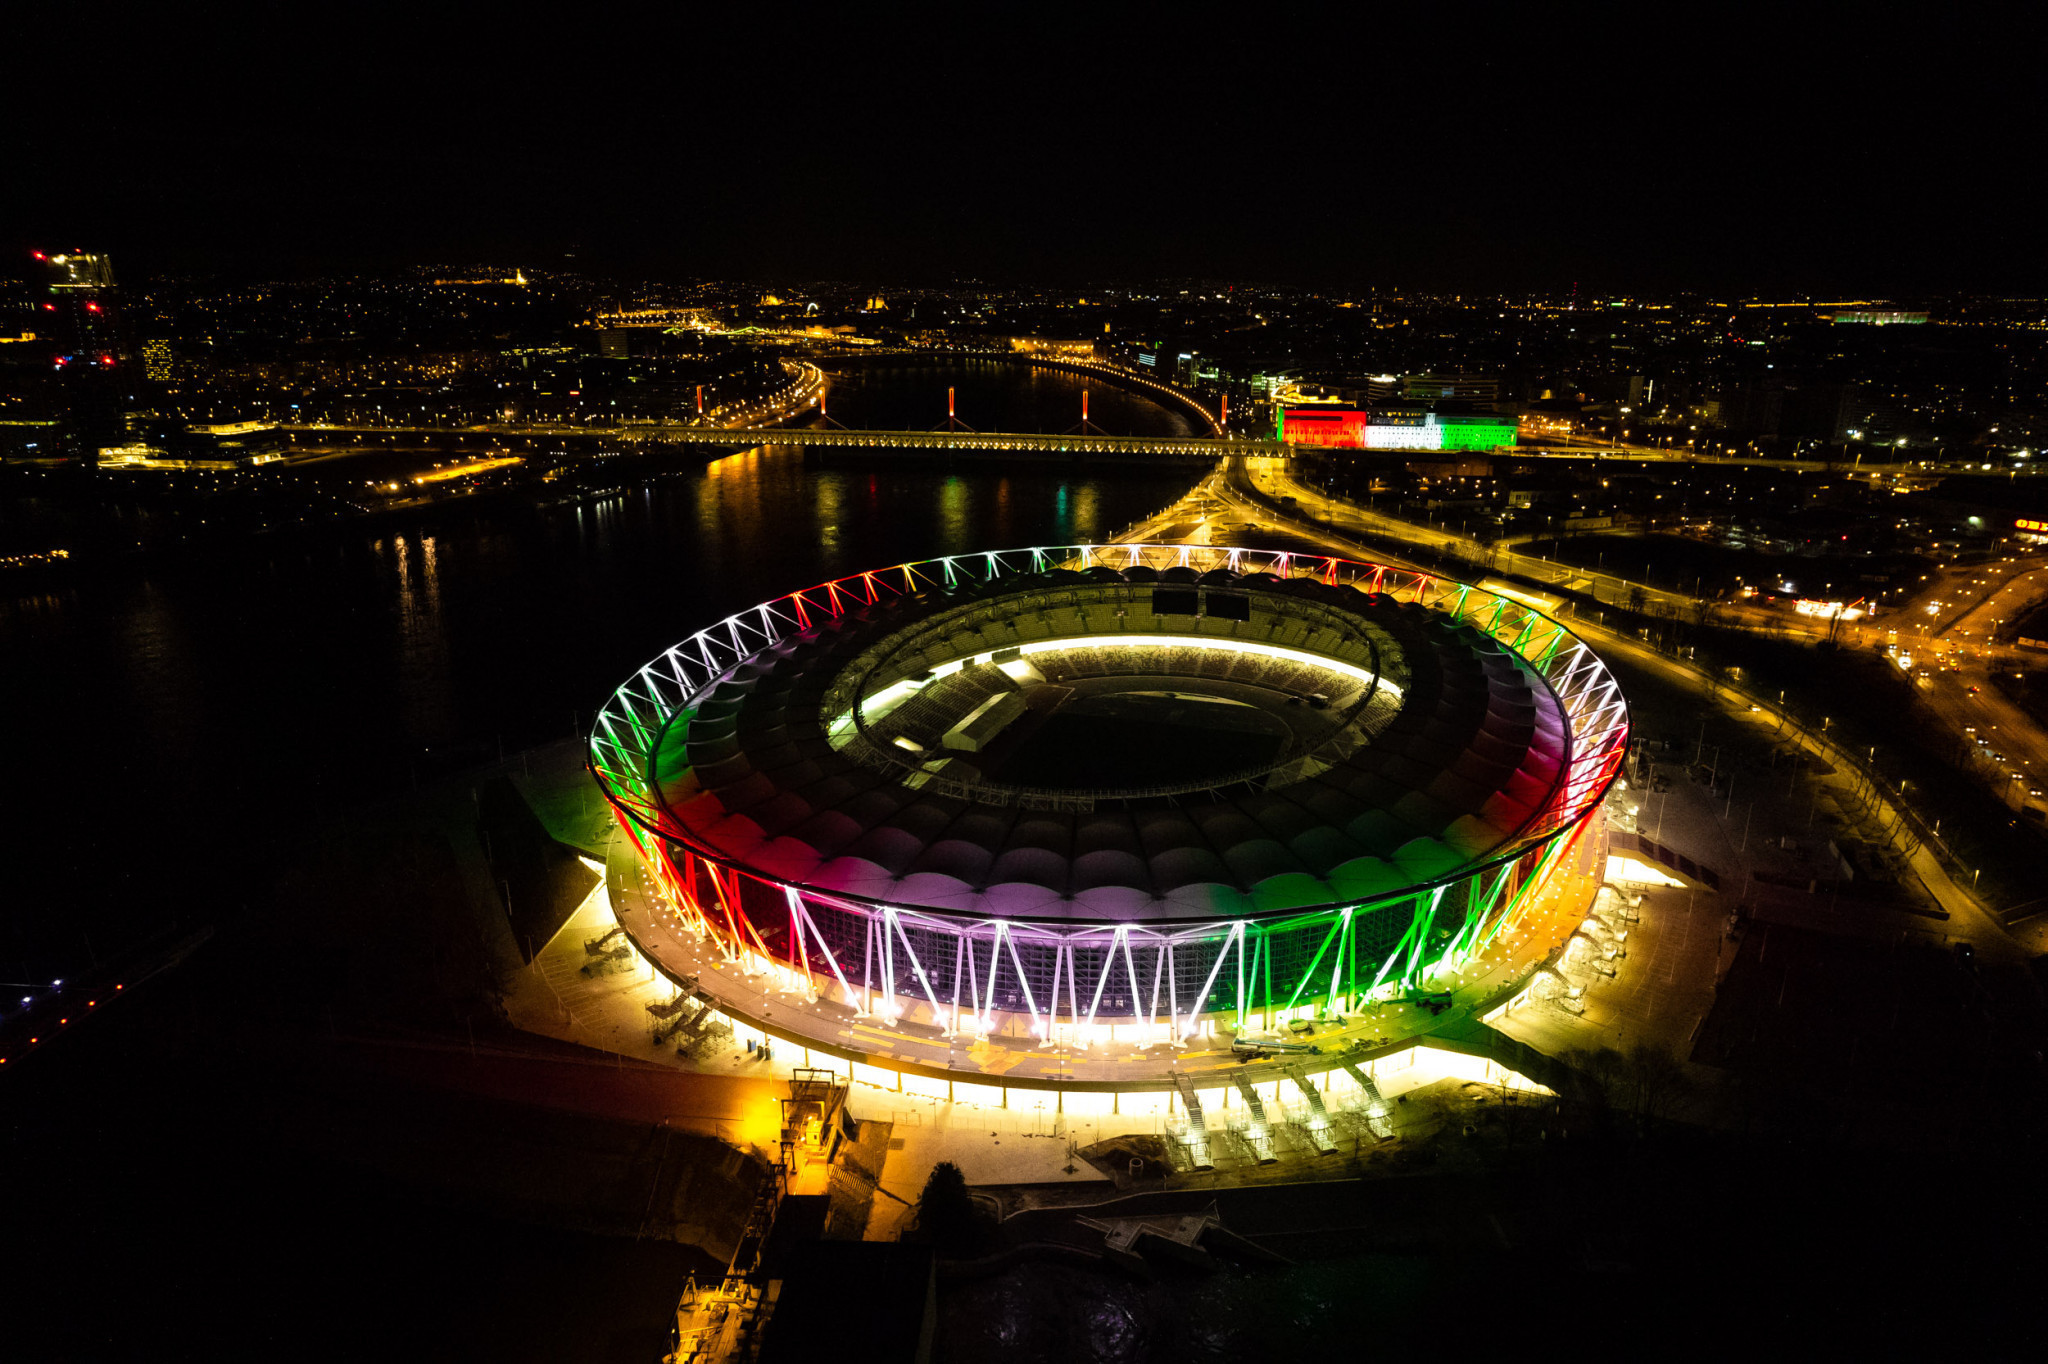 The brand new purpose-built National Athletics Centre where tickets and packages are available for 14 sessions ©Budapest 2023